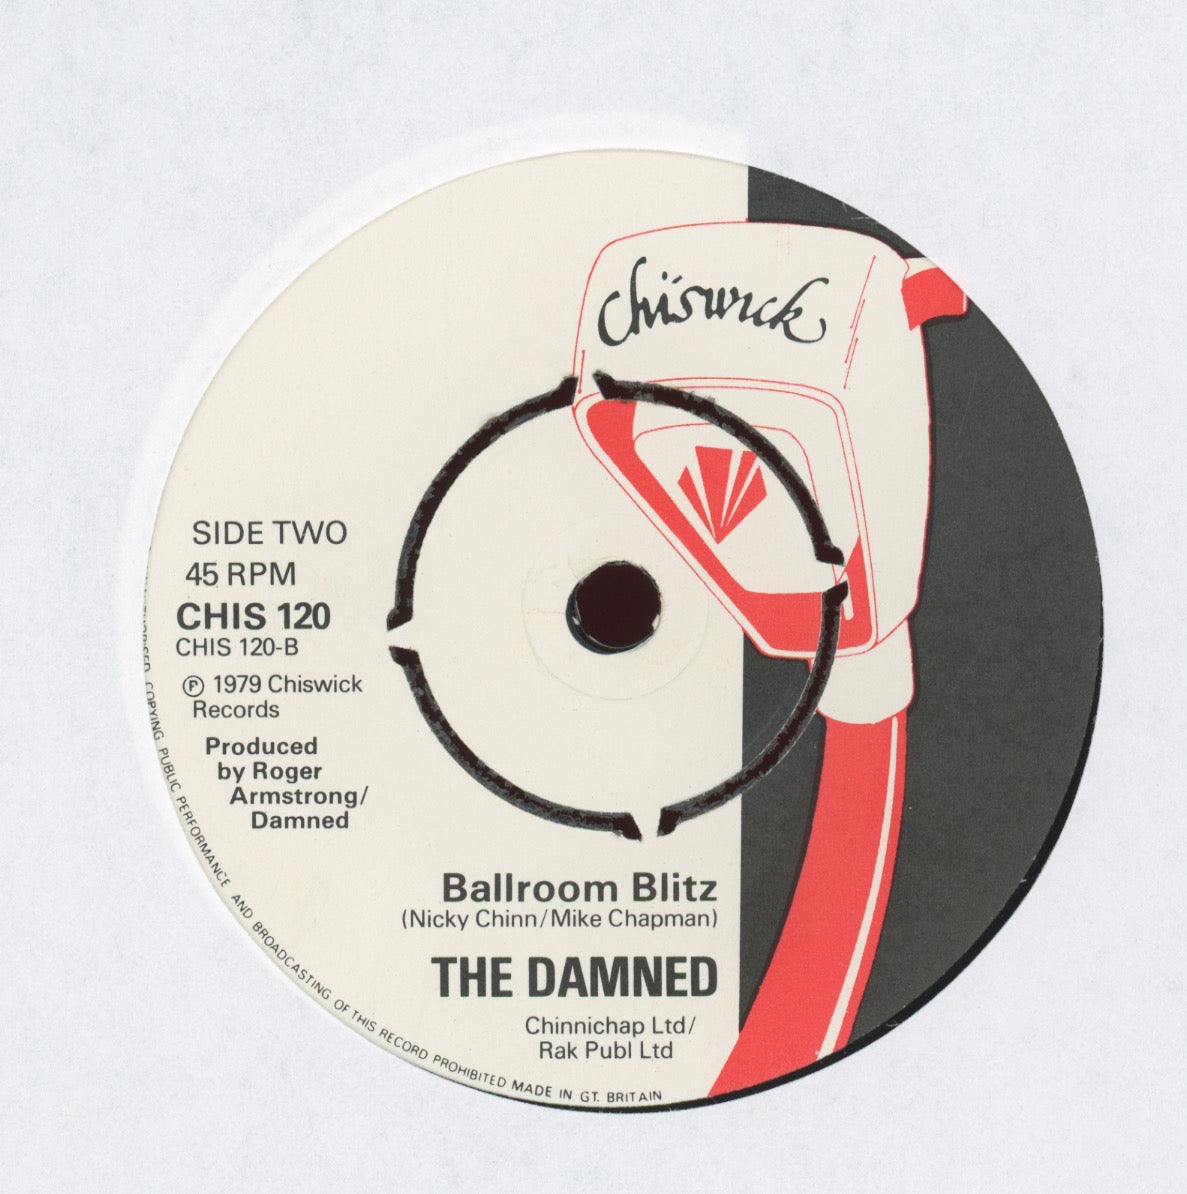 The Damned - I Just Can't Be Happy Today on Chiswick 45 With Picture Sleeve